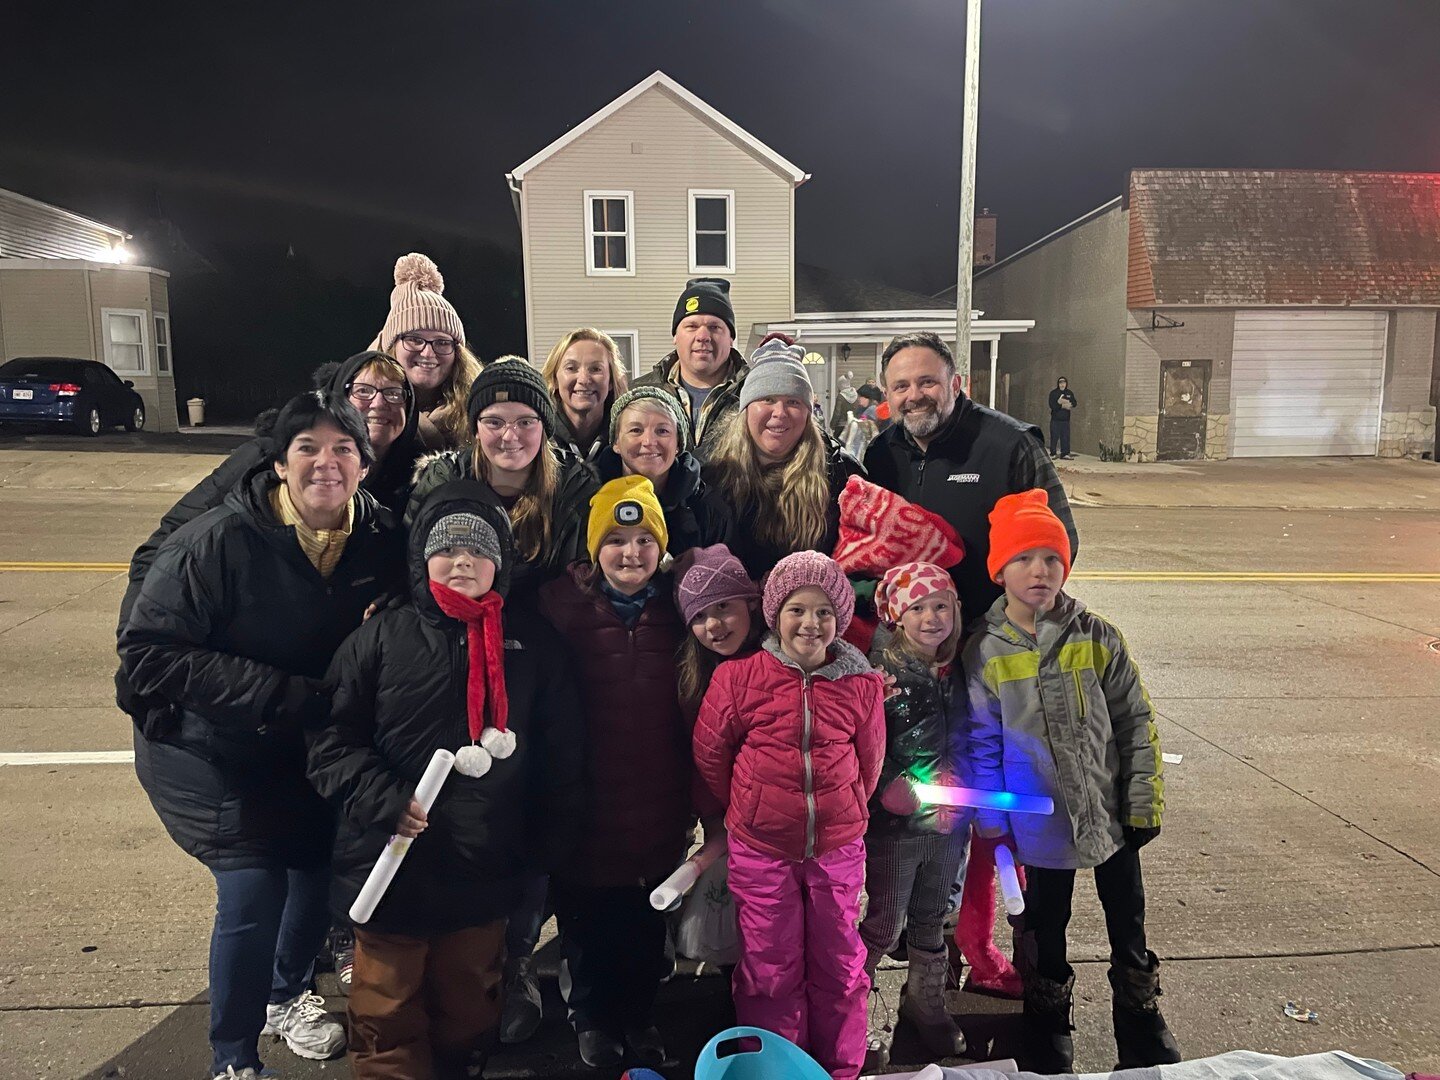 Tell me about your Thanksgiving! What are you thankful for? 

My Thanksgiving was full of blessings. Manitowoc Christmas Parade on Thanksgiving Eve (yes, that is a thing!). Thanksgiving Turkey Trot in the morning to get in some exercise. Cooking and 